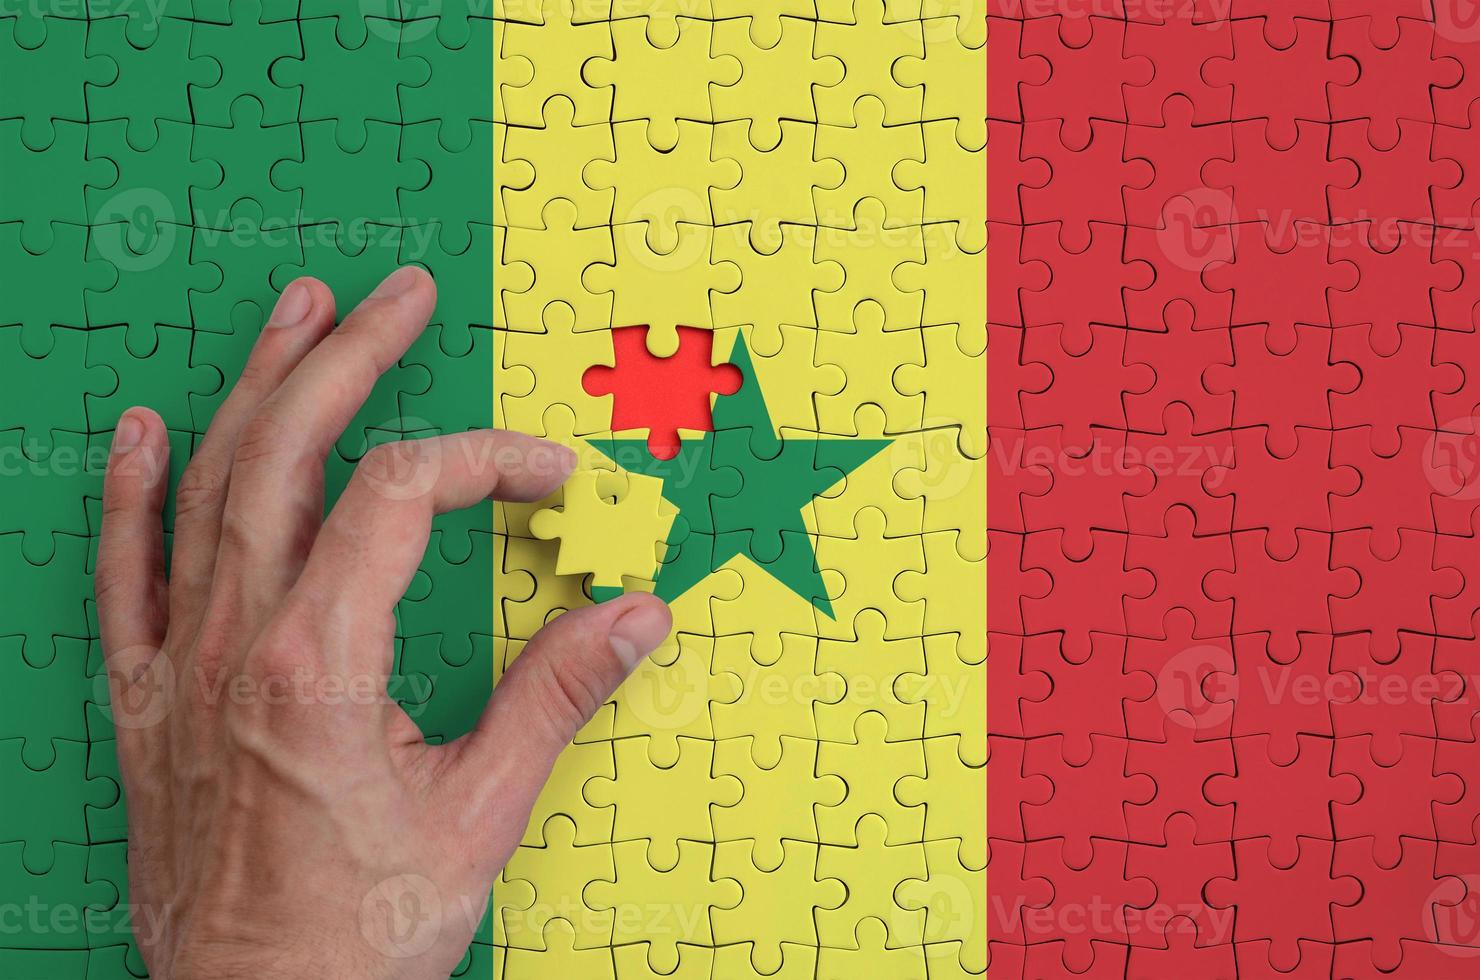 Senegal flag is depicted on a puzzle, which the man's hand completes to fold photo